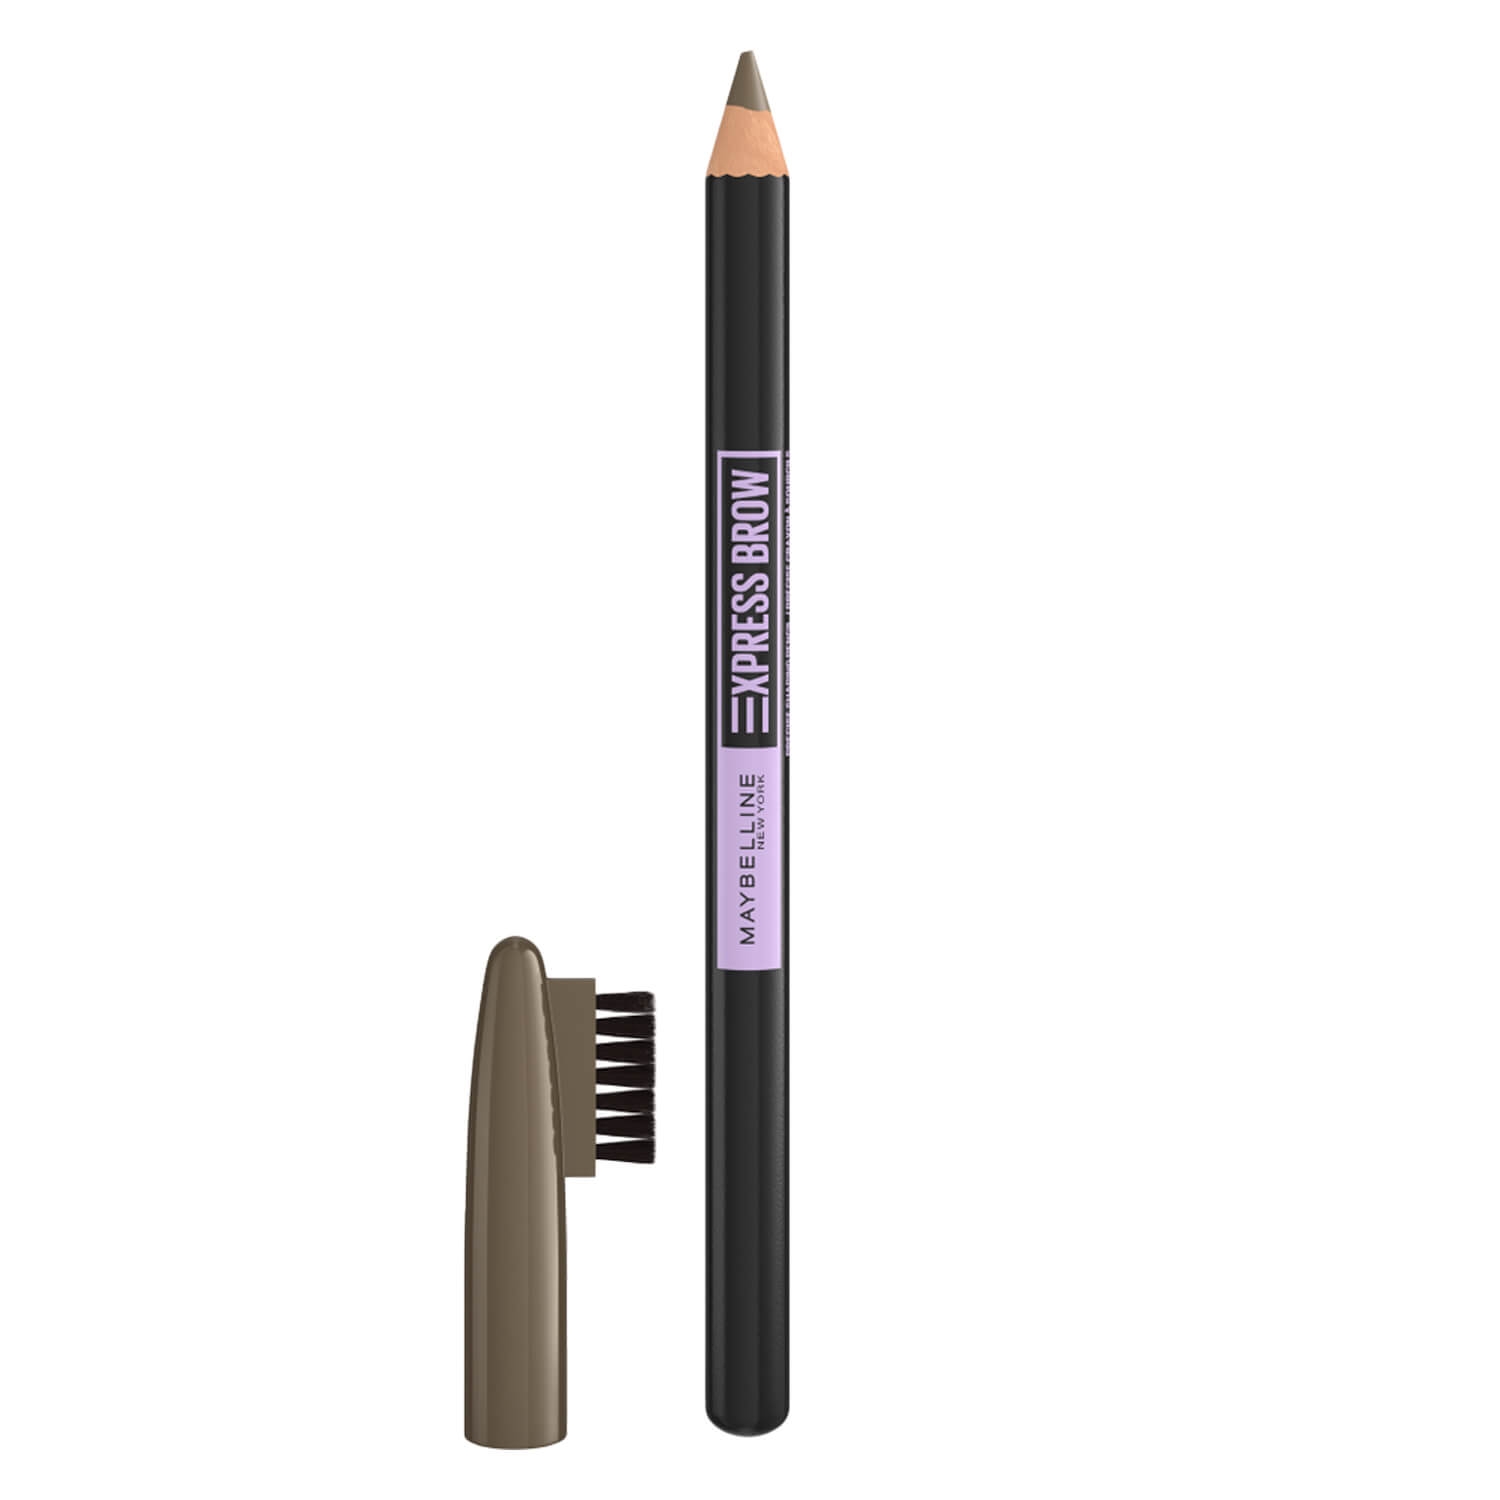 Image du produit de Maybelline NY Brows - Express Brow Precise Shaping 04 Medium Brown